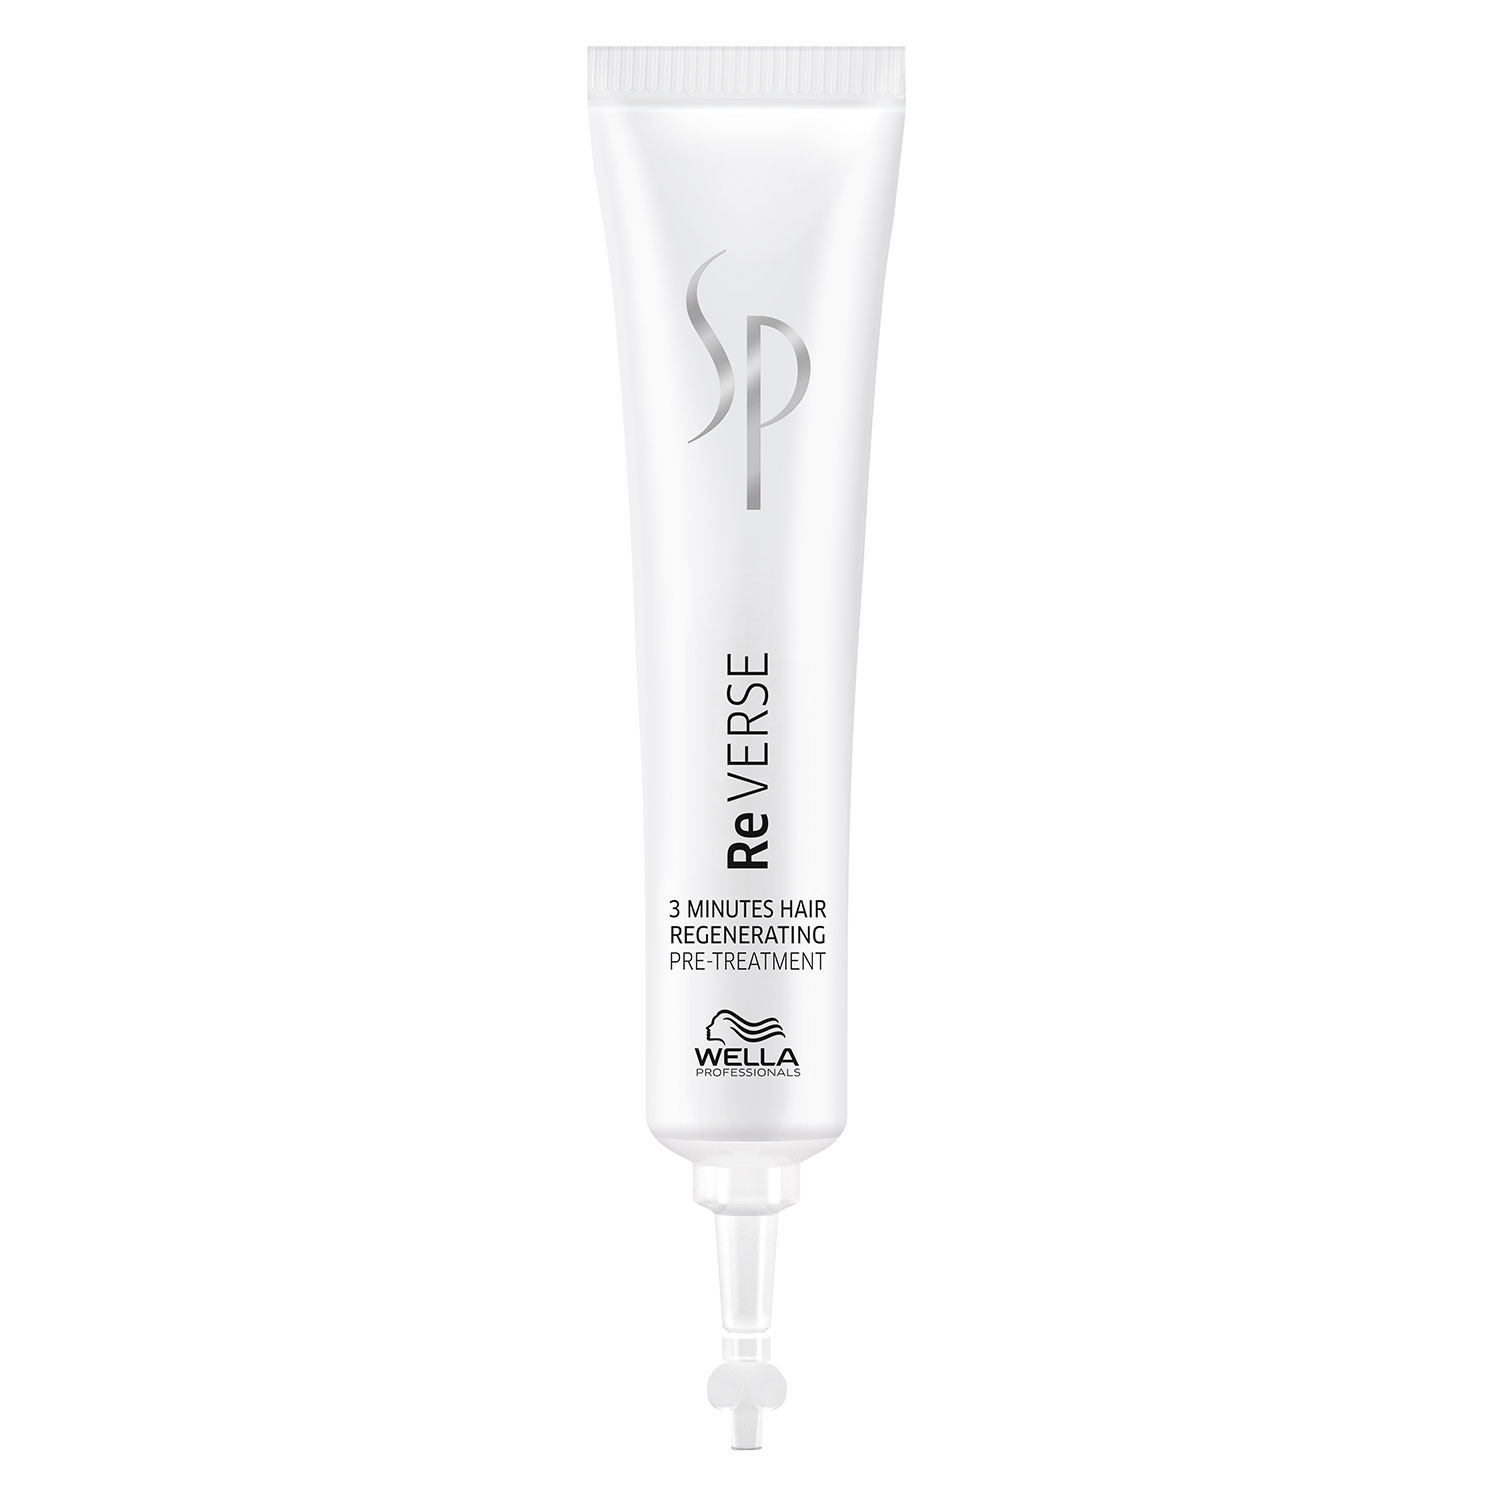 Product image from SP Reverse - Regenerating Hair Treatment